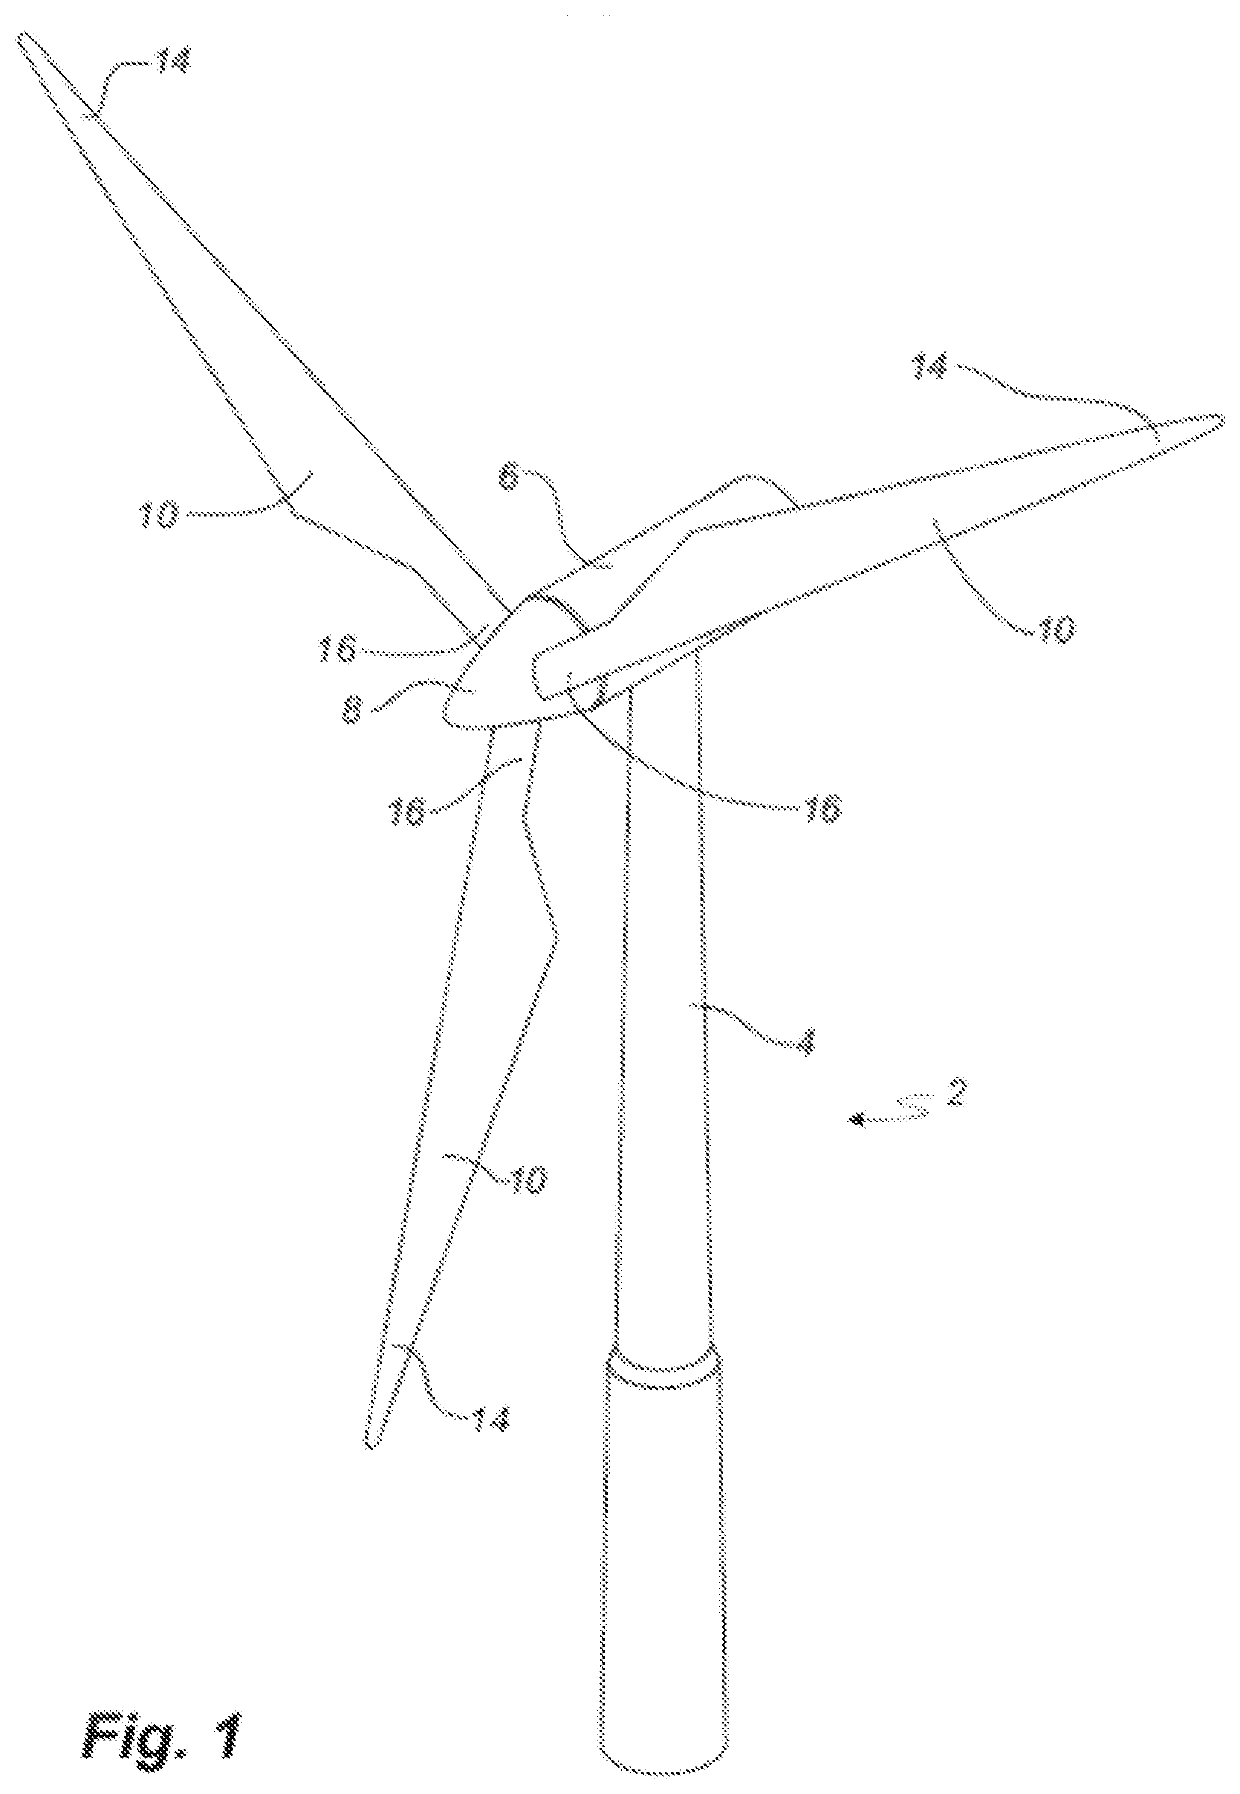 Distance member for connecting wind turbine blade shear webs